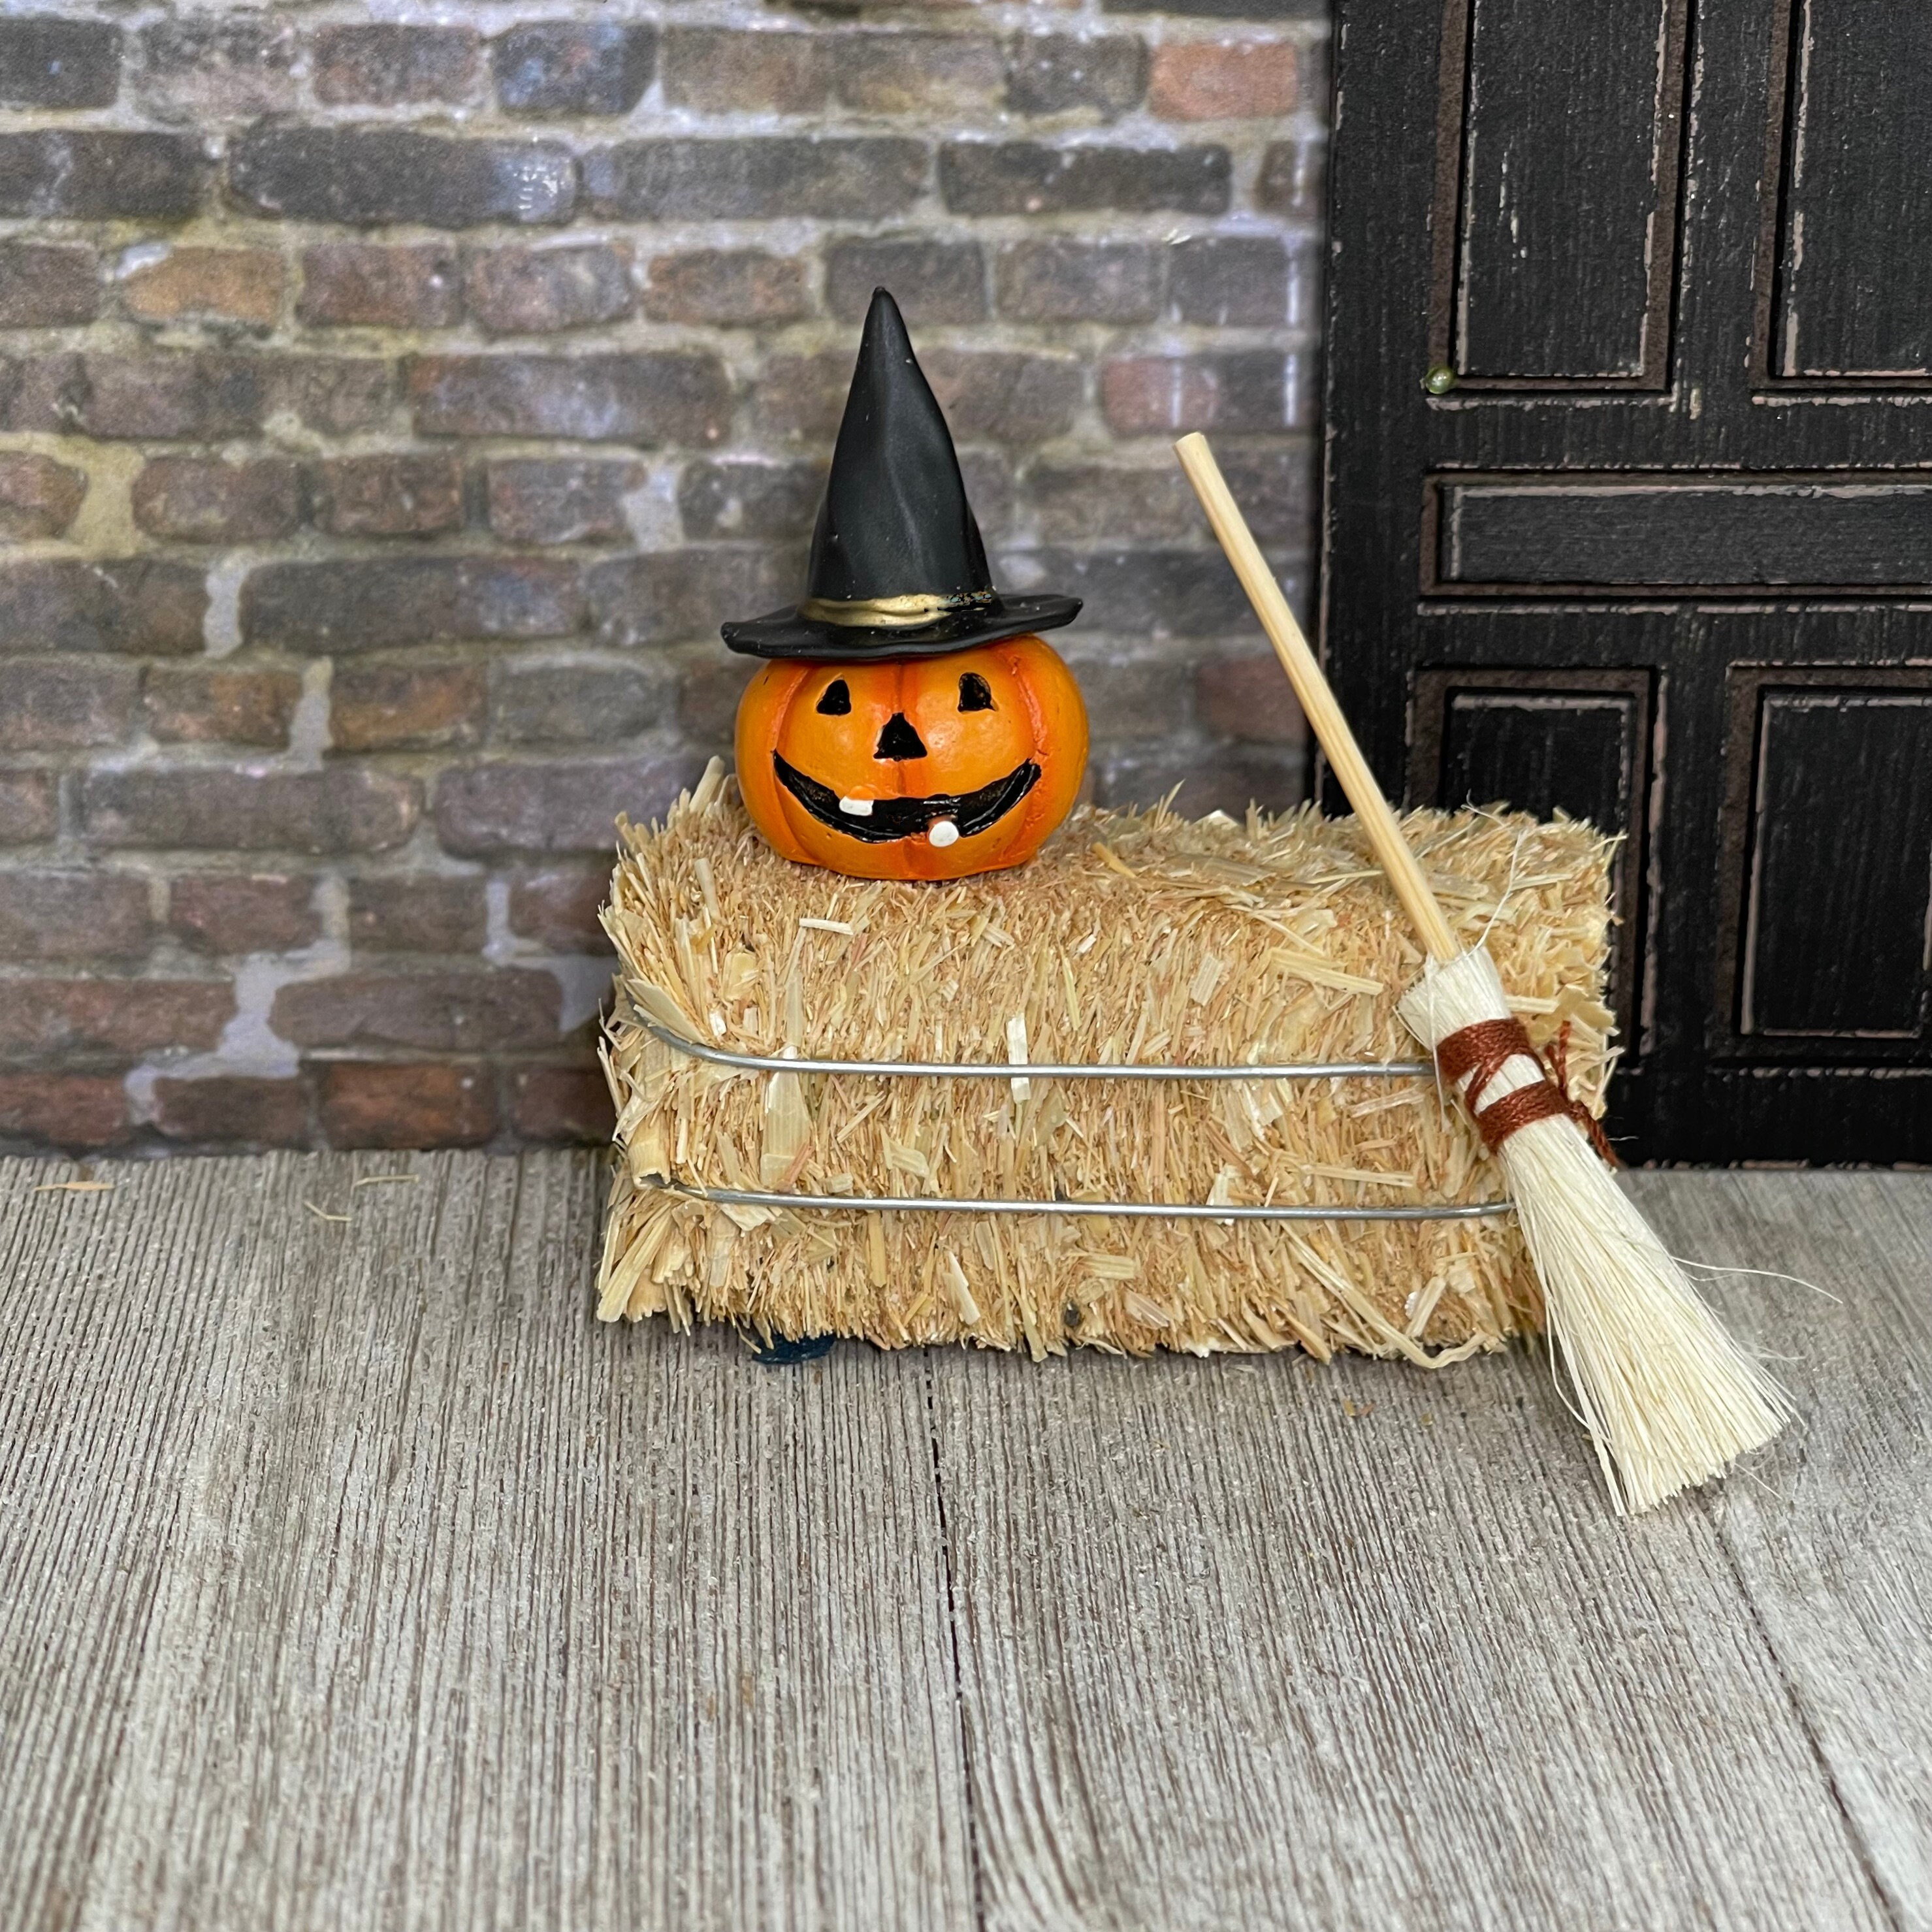 Witch Hat Straw Toppers for Halloween - Create Craft Love